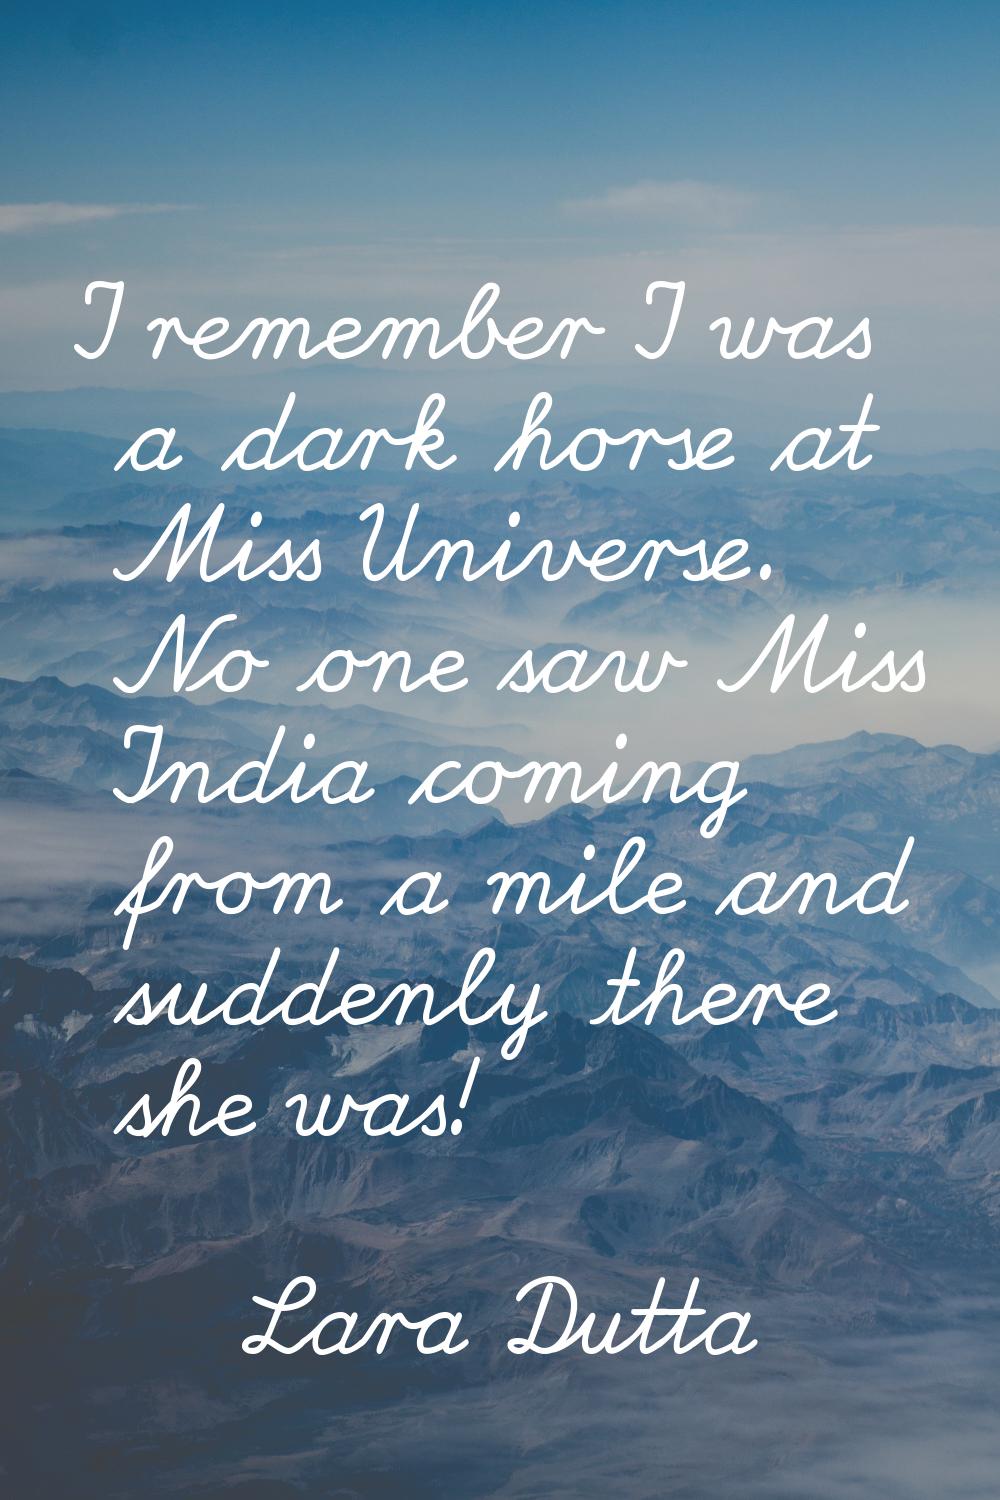 I remember I was a dark horse at Miss Universe. No one saw Miss India coming from a mile and sudden